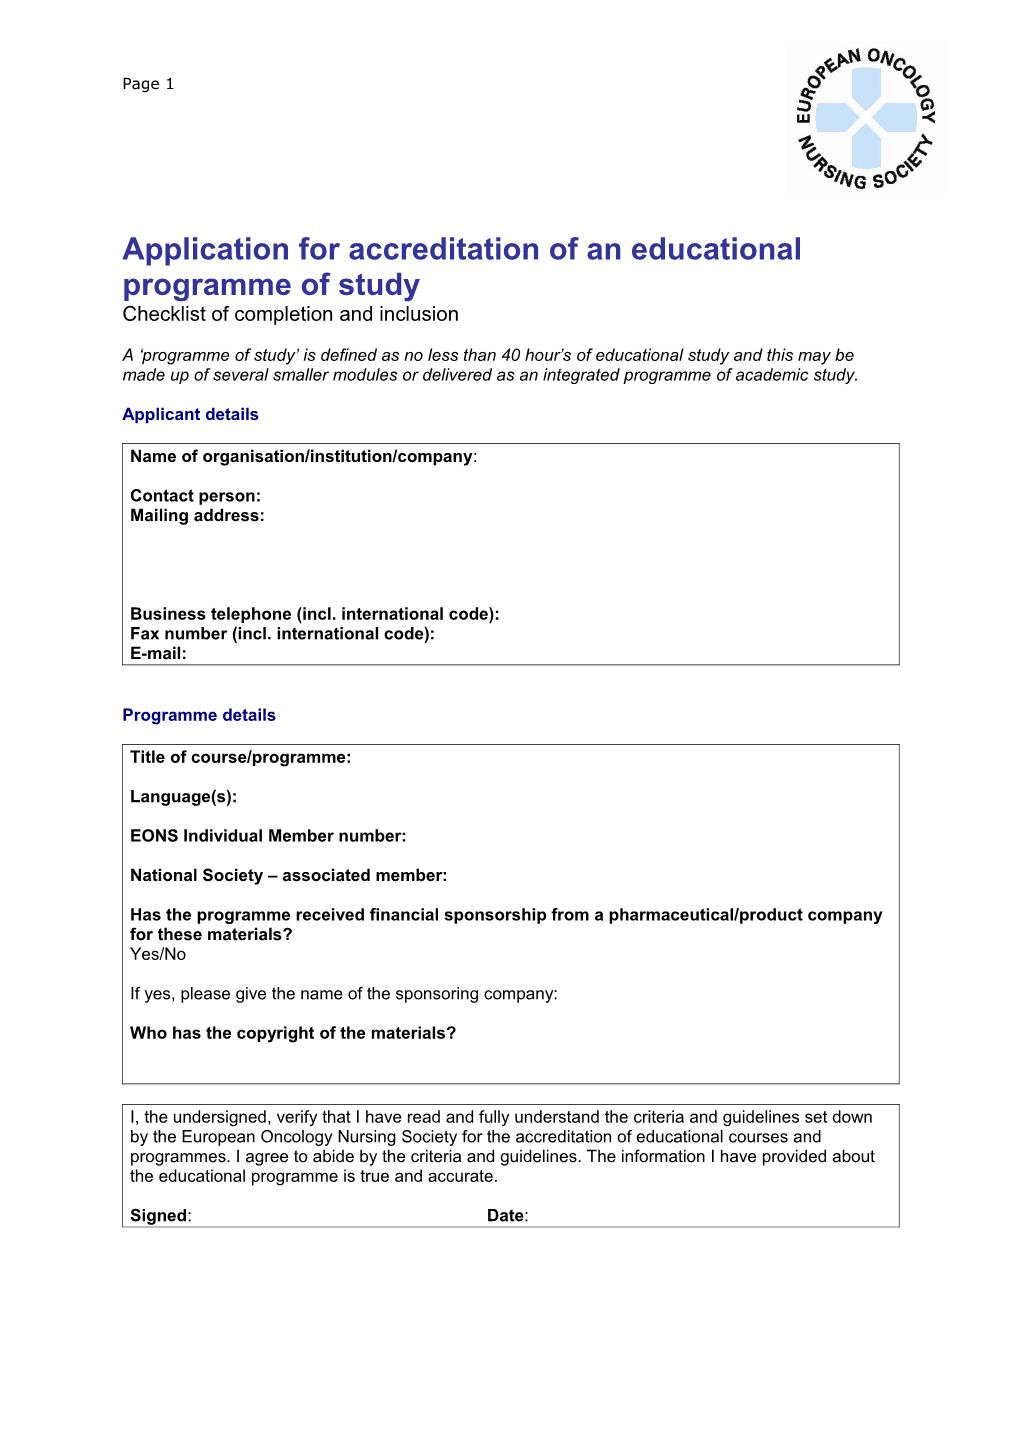 Application for Accreditation of an Educational Programme of Study